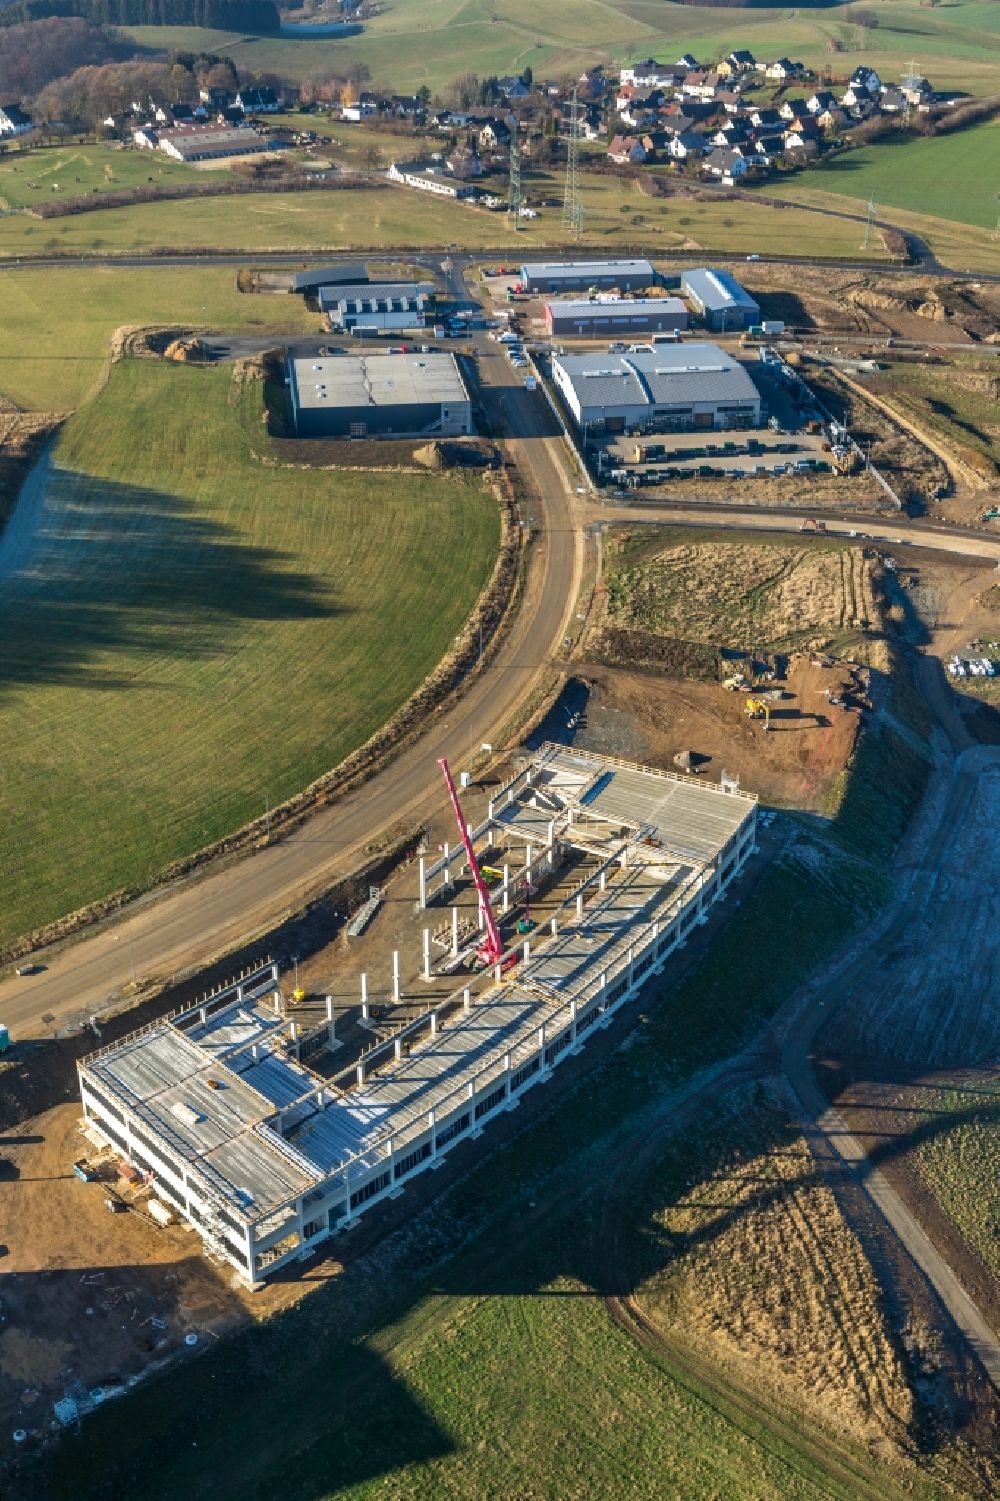 Rosmart from the bird's eye view: Extension - new building - construction site on the factory premises on Rosmarter Allee in Rosmart in the state North Rhine-Westphalia, Germany